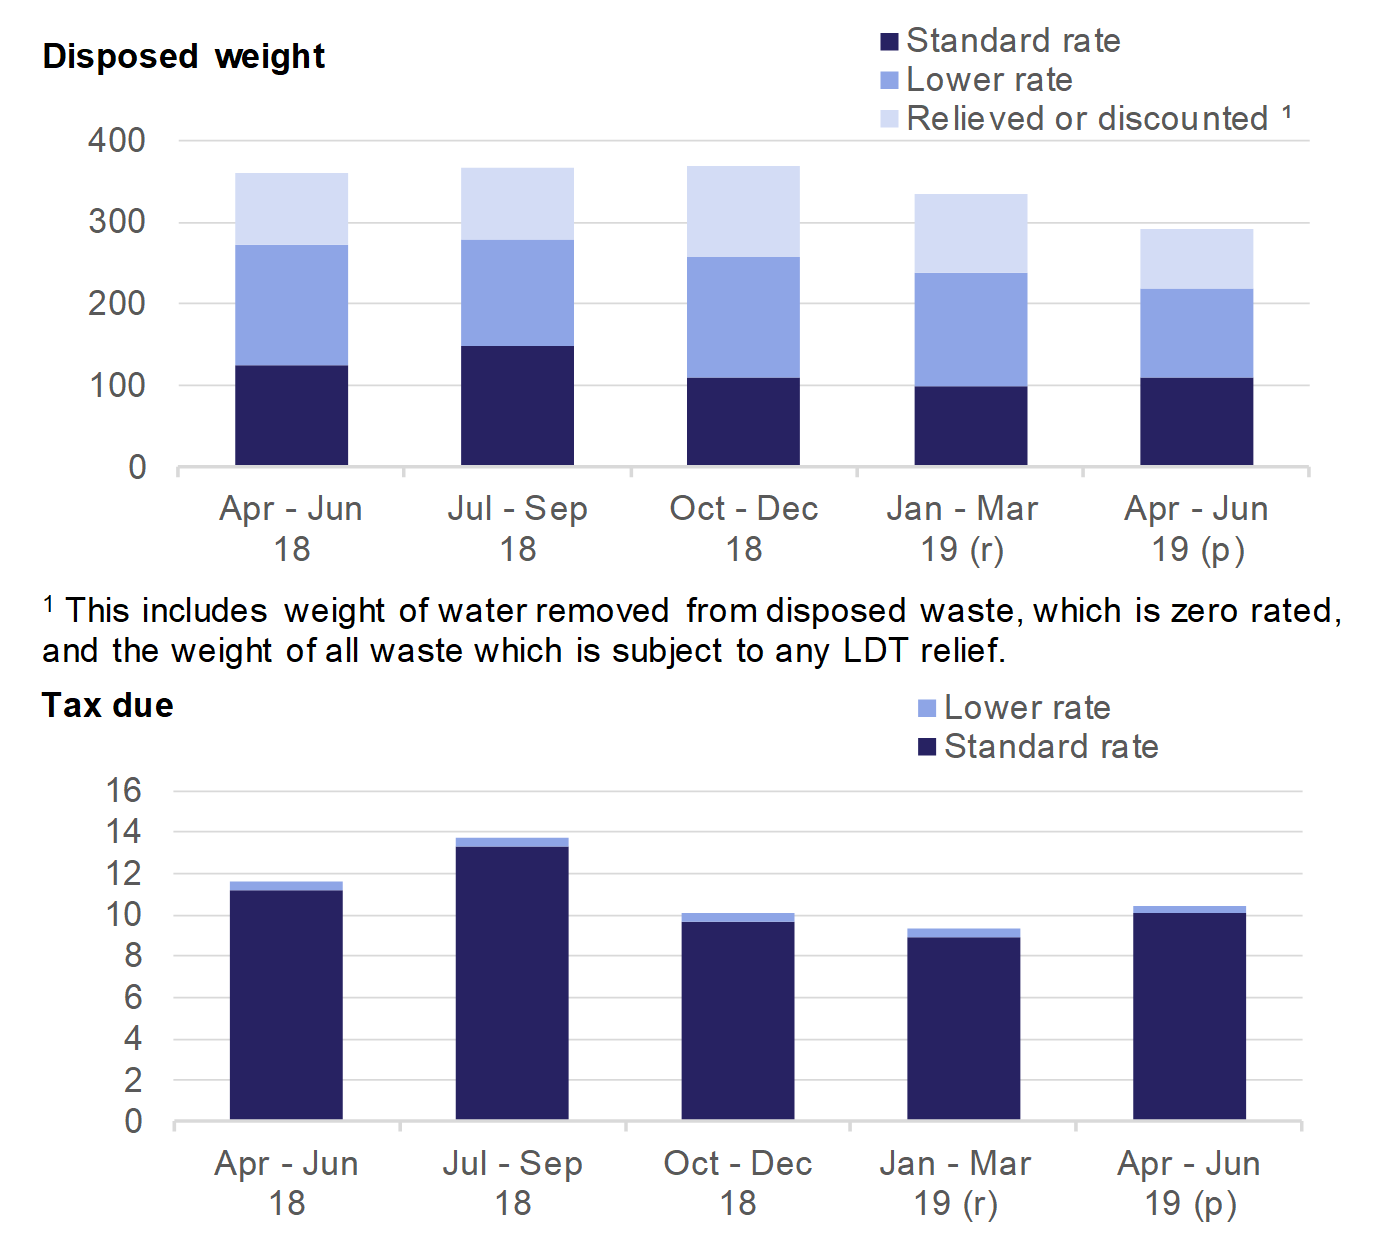 Chart 1 shows the weight of and tax due on waste disposed to landfill, by quarter.